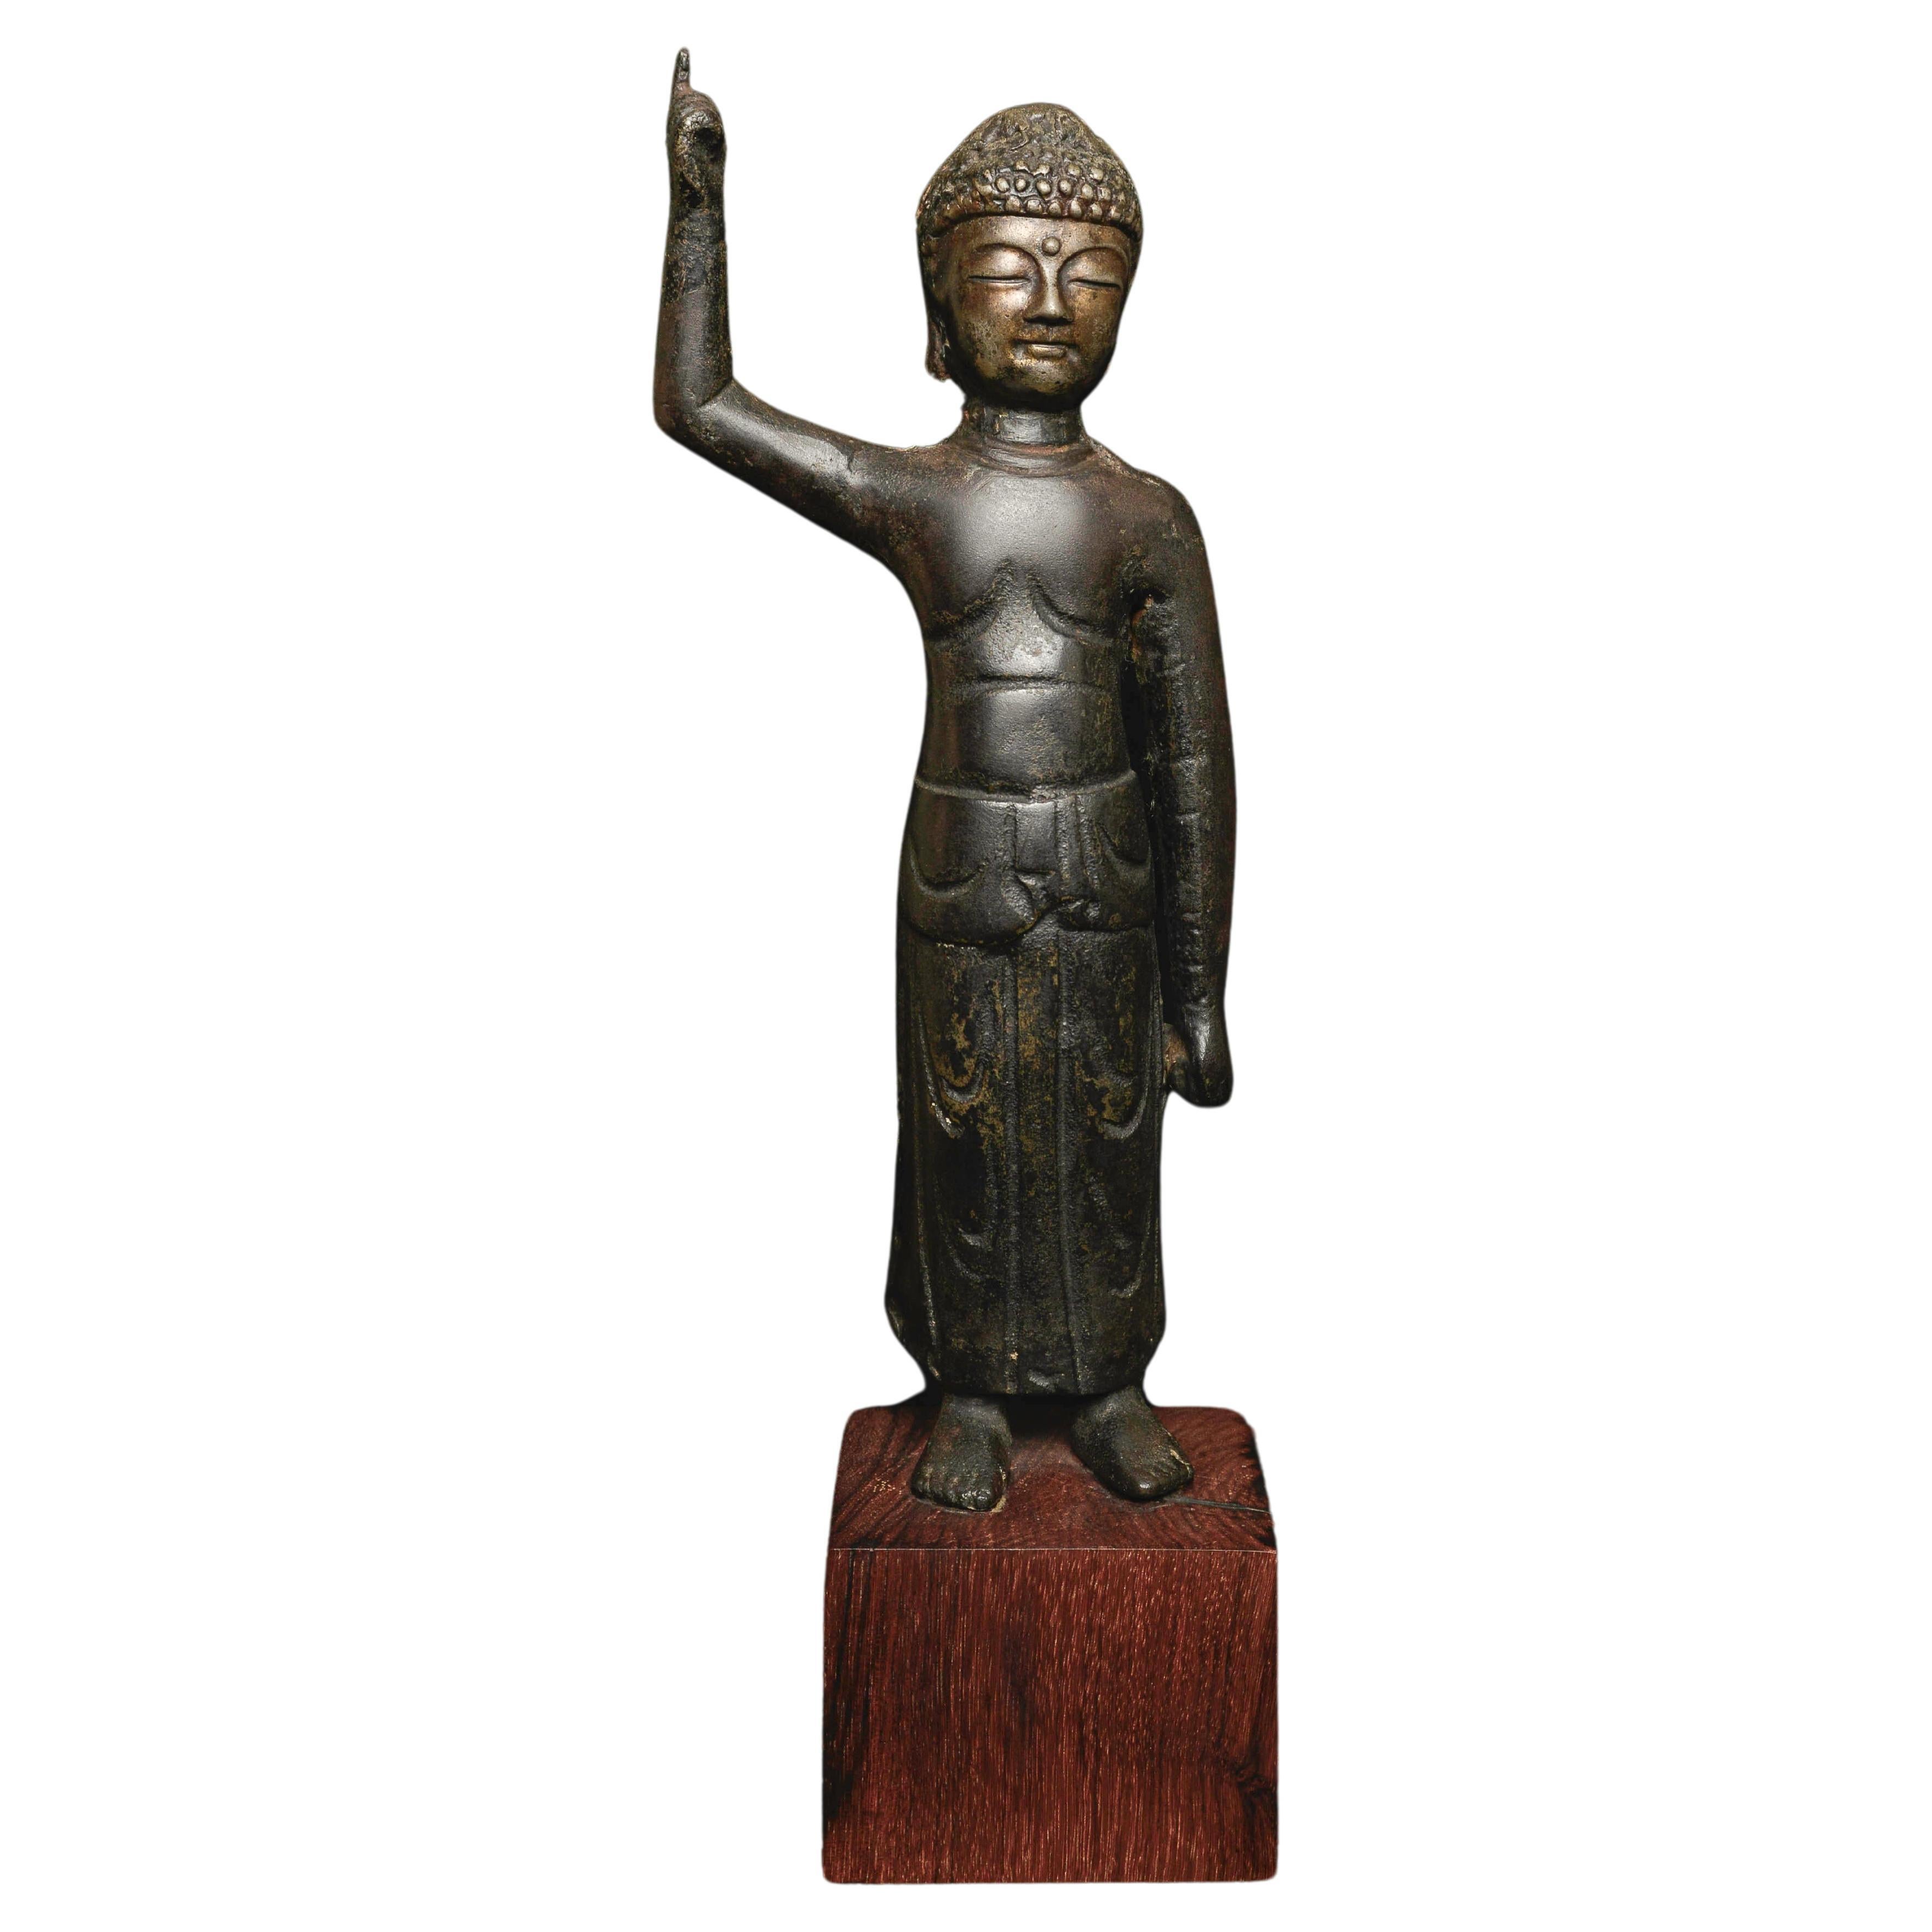 16/17thC Korean Baby Buddha pointing to heaven and earth.